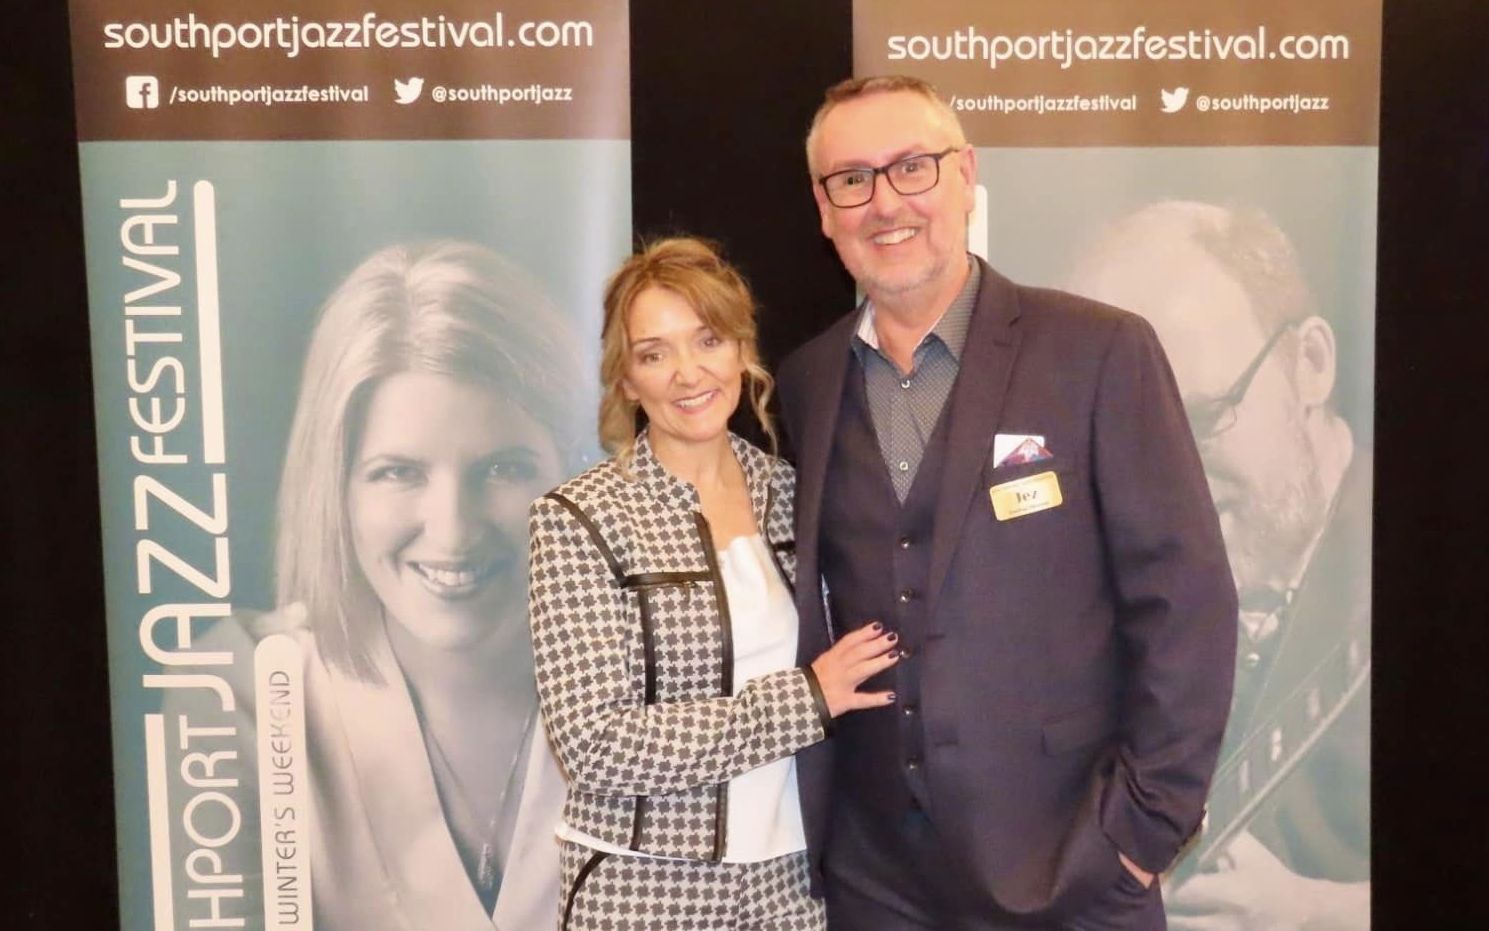 Southport Jazz Festival Directors Emma Holcroft and Jez Murphy. Photo by Andrew Brown Media